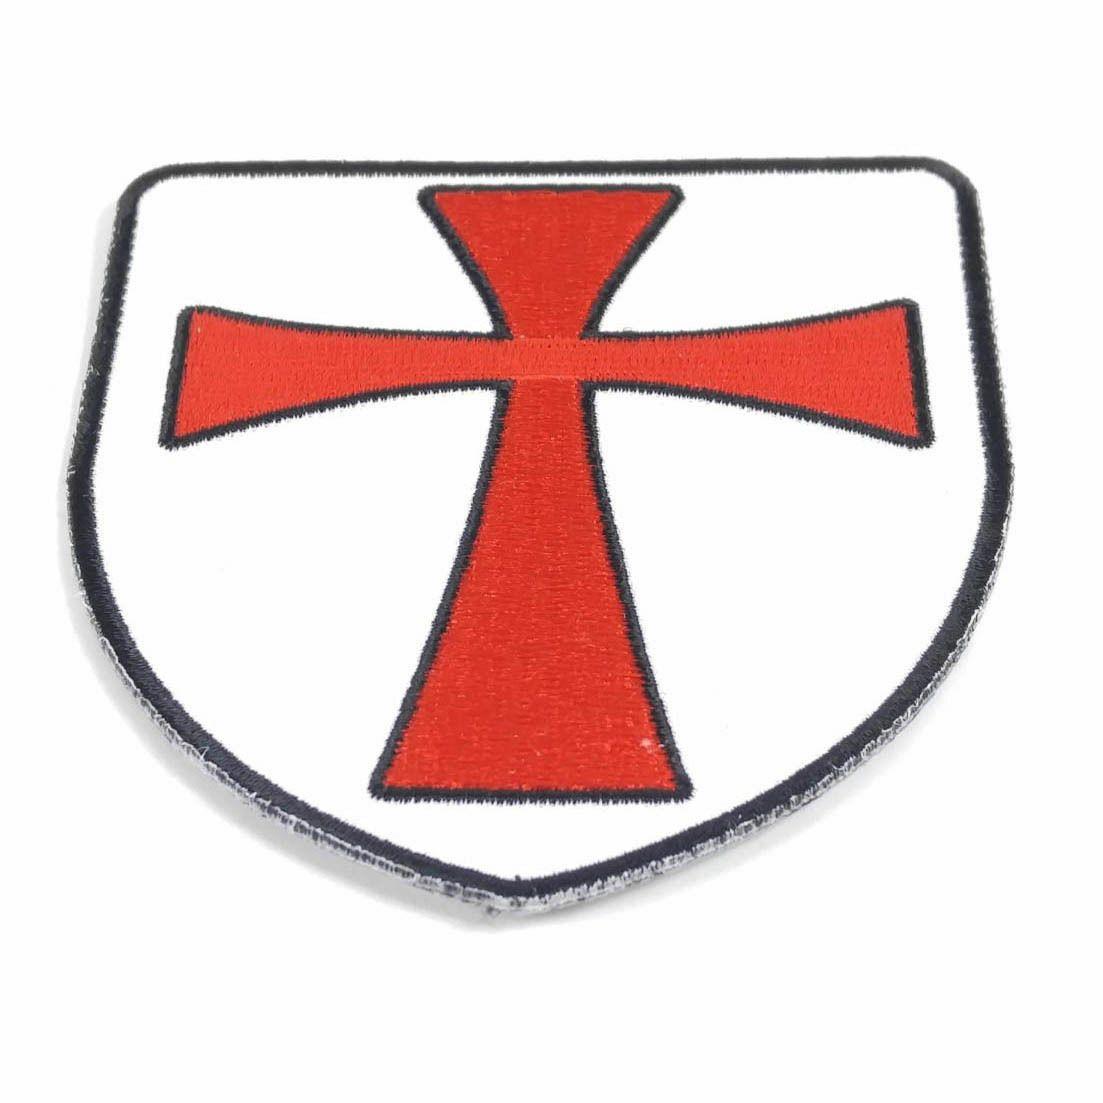 Red Cross in Shield Logo - Embroidered Knights Templar Shield Red Cross Sew or Iron on Patch ...